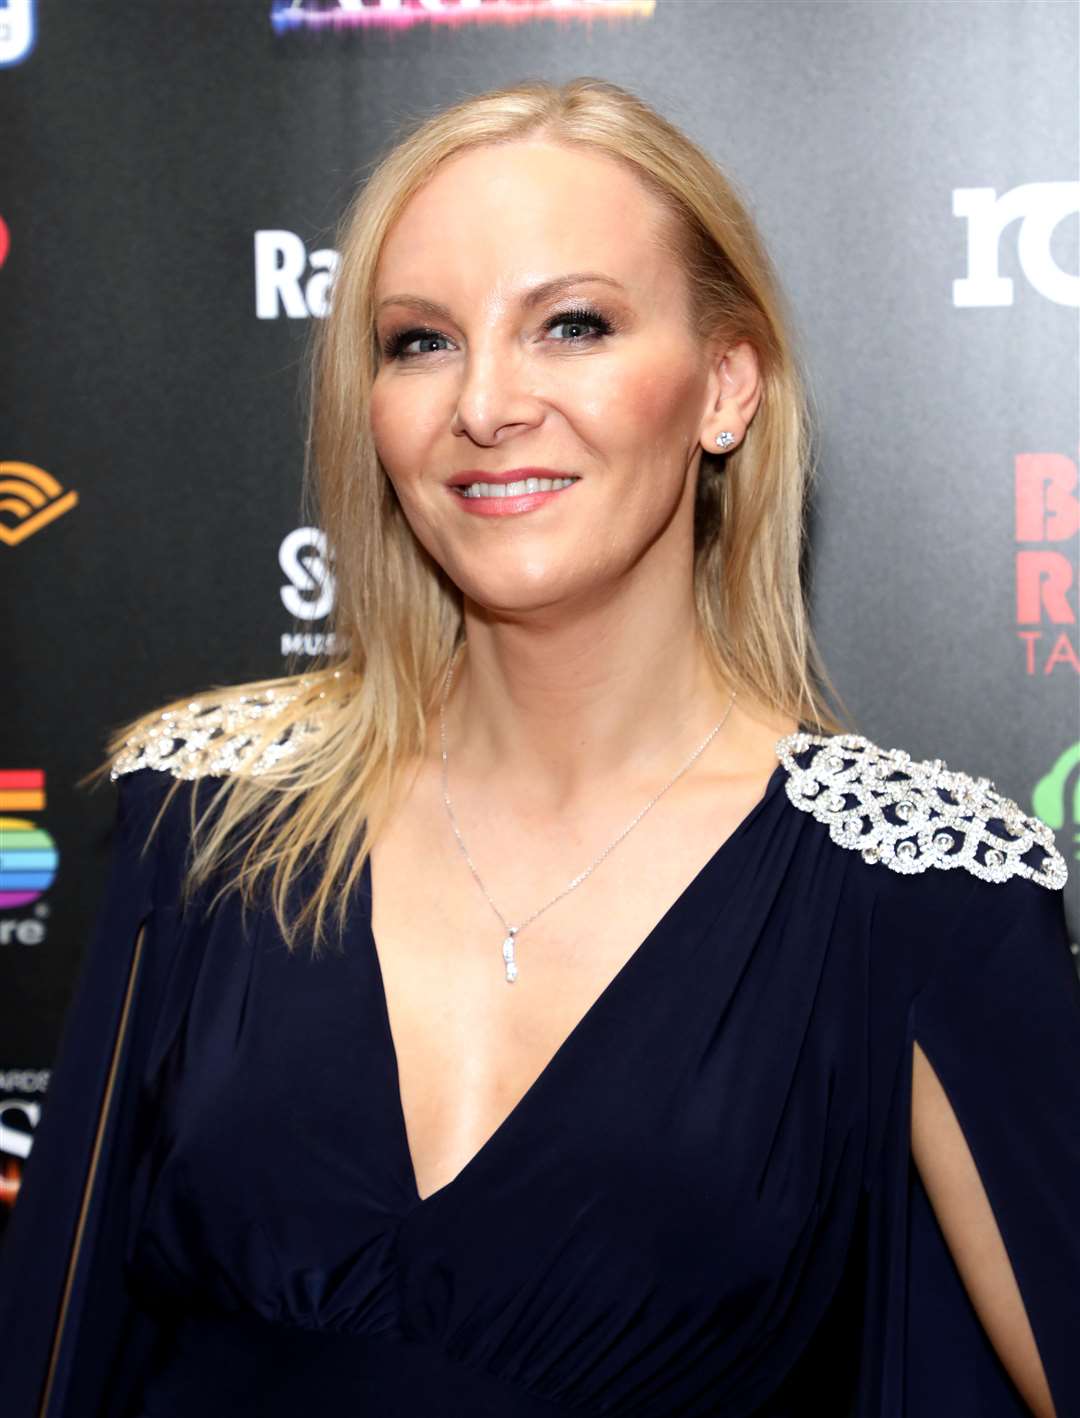 Stephanie Hirst, pictured during a radio industry awards ceremony (Lia Toby/PA)